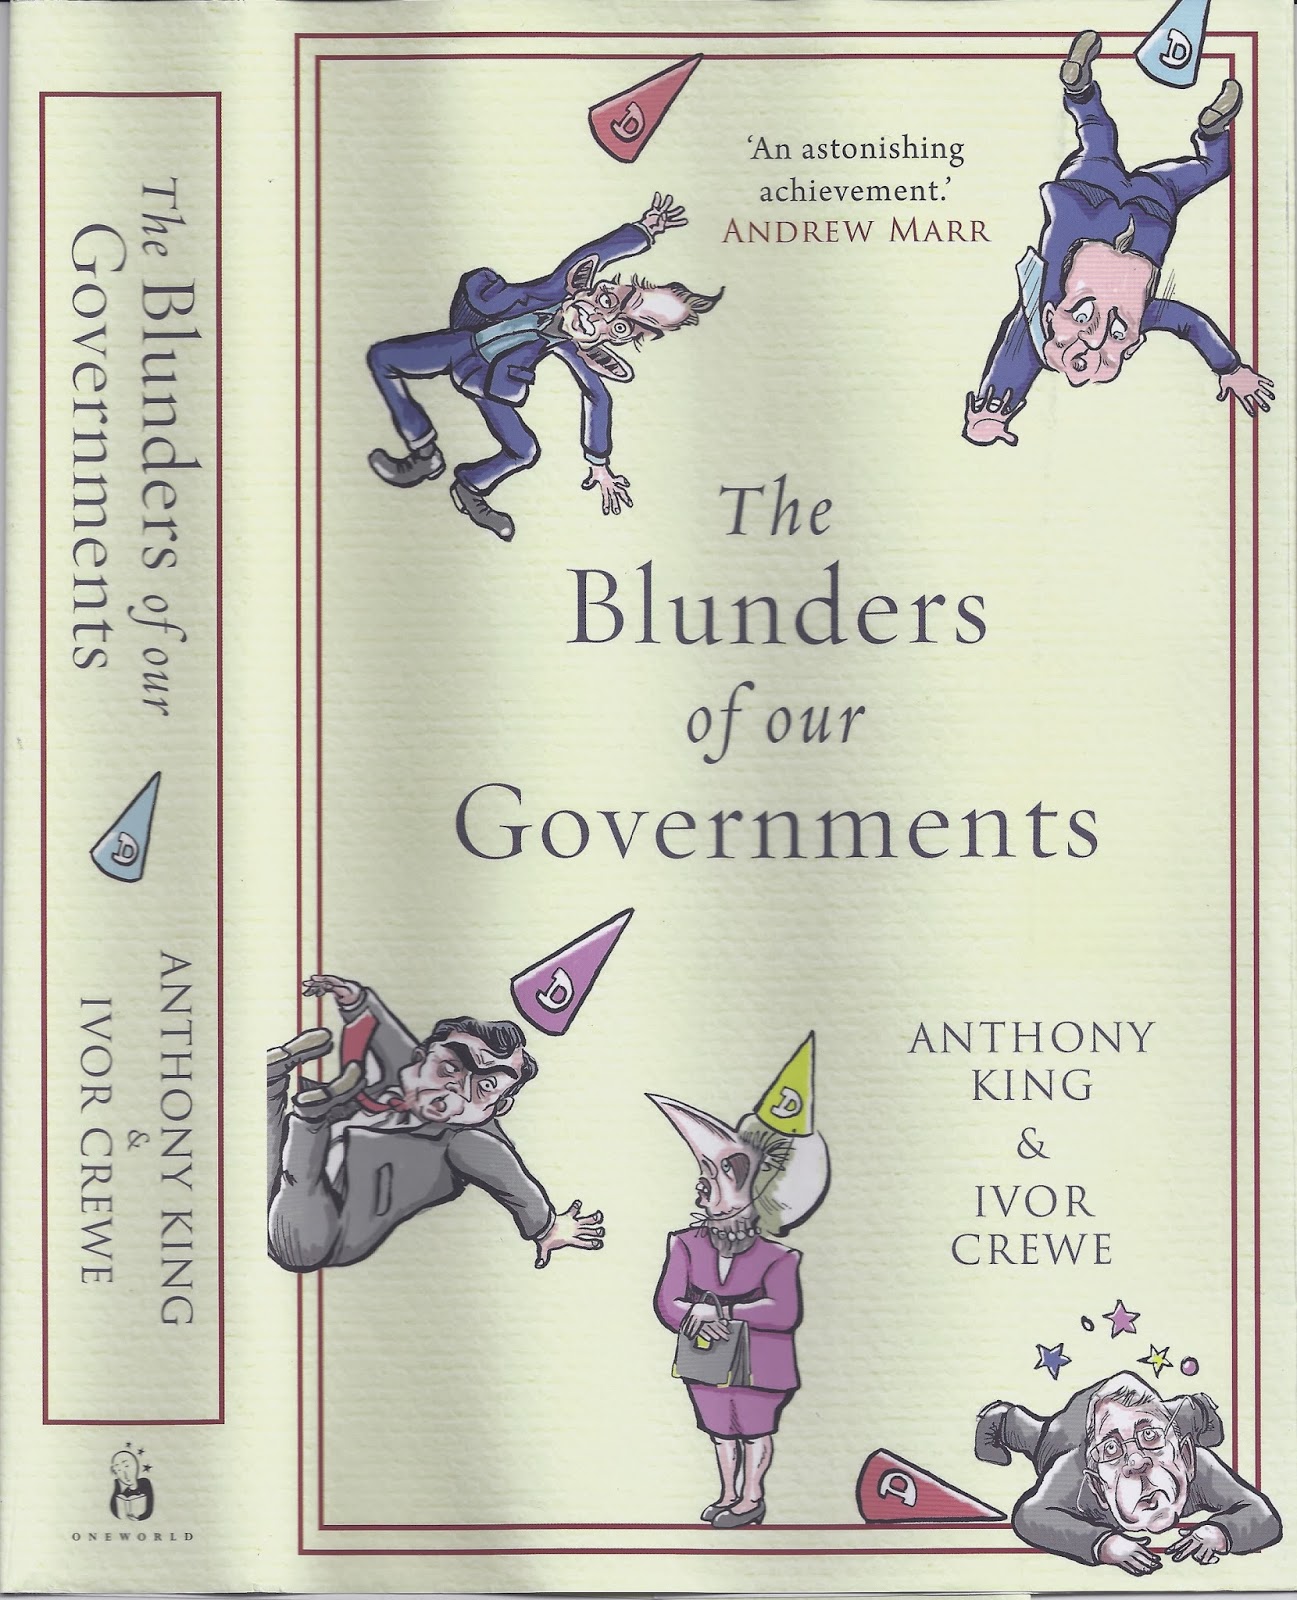 The Blunders of Our Governments, Book by Anthony King, Ivor Crewe, Official Publisher Page